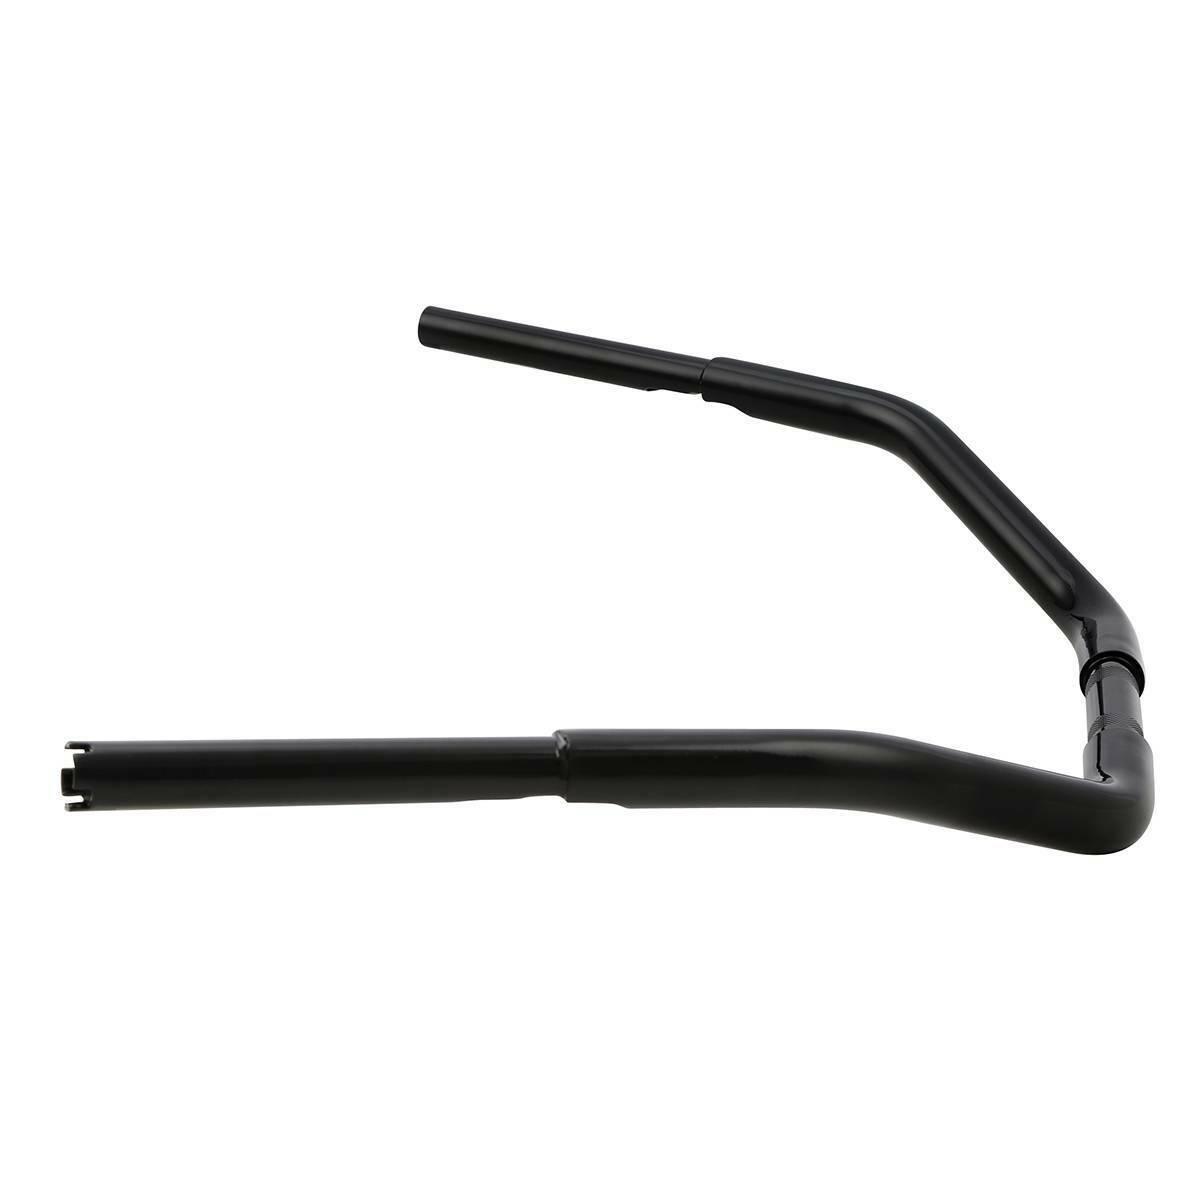 Black 3.5" Rise Fat Beach HandleBar For Harley Touring Road King Sportster XL US - Moto Life Products